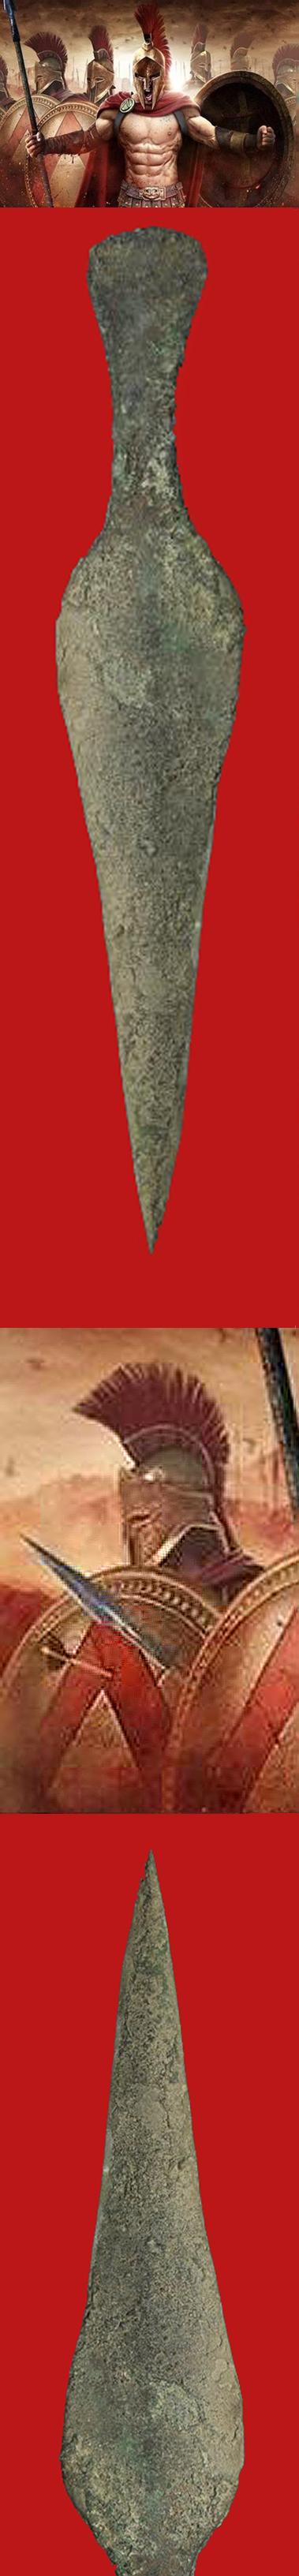 A Breathtaking & Large Original Ancient Greek Leaf Shaped Dagger From The Greco-Persian Wars Era, From the Time of the Spartans at Thermopylae, To Alexander the Great's Conquest of Persia & Egypt